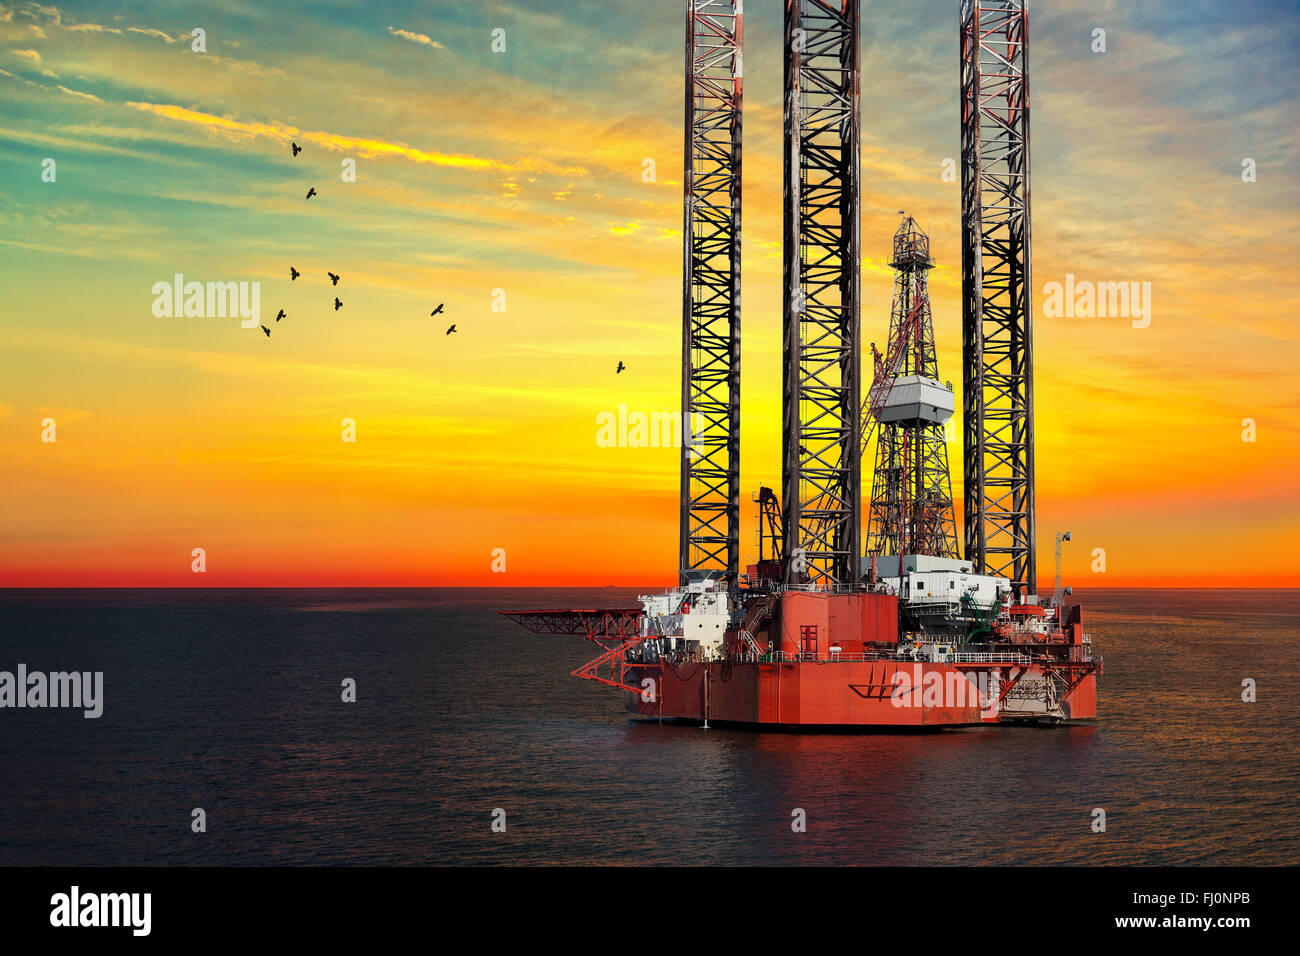 Oil drilling rig in sunset time. Stock Photo